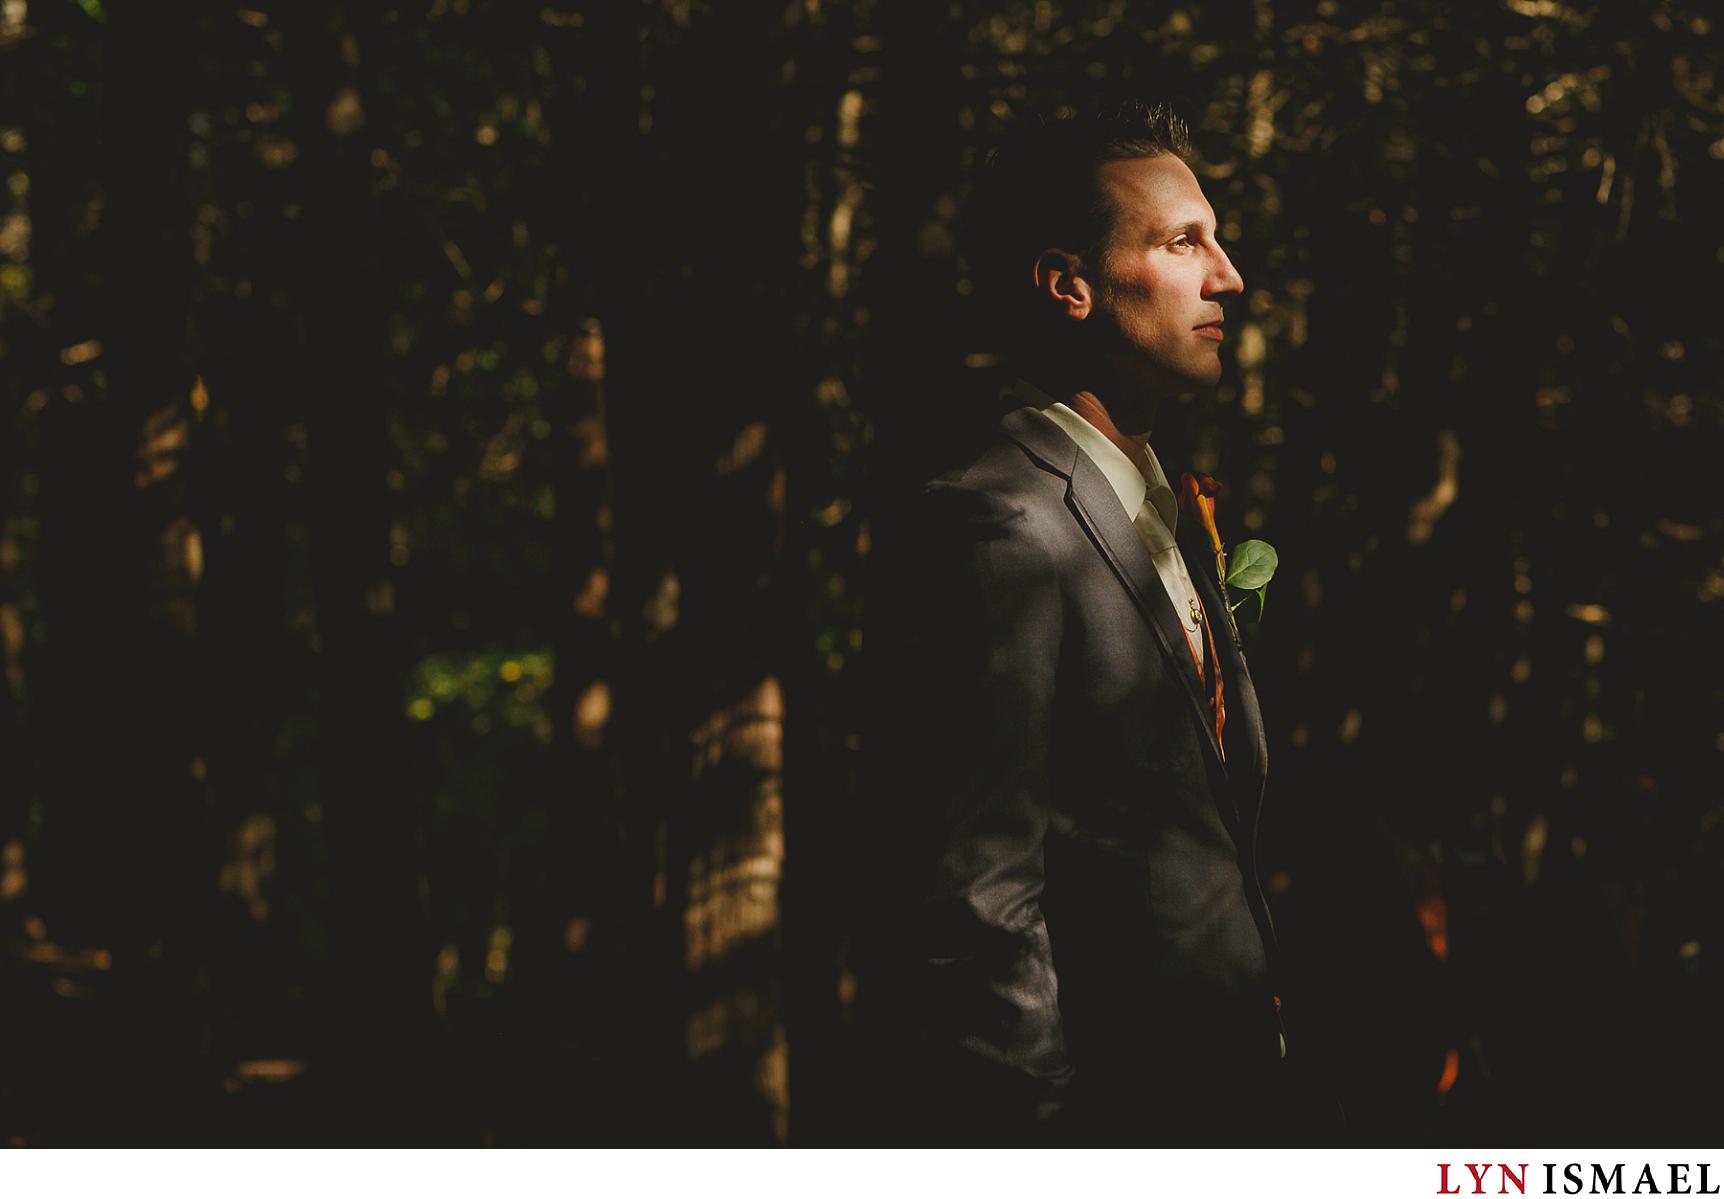 dramatically lit portrait of the groom in Elora, Ontario.